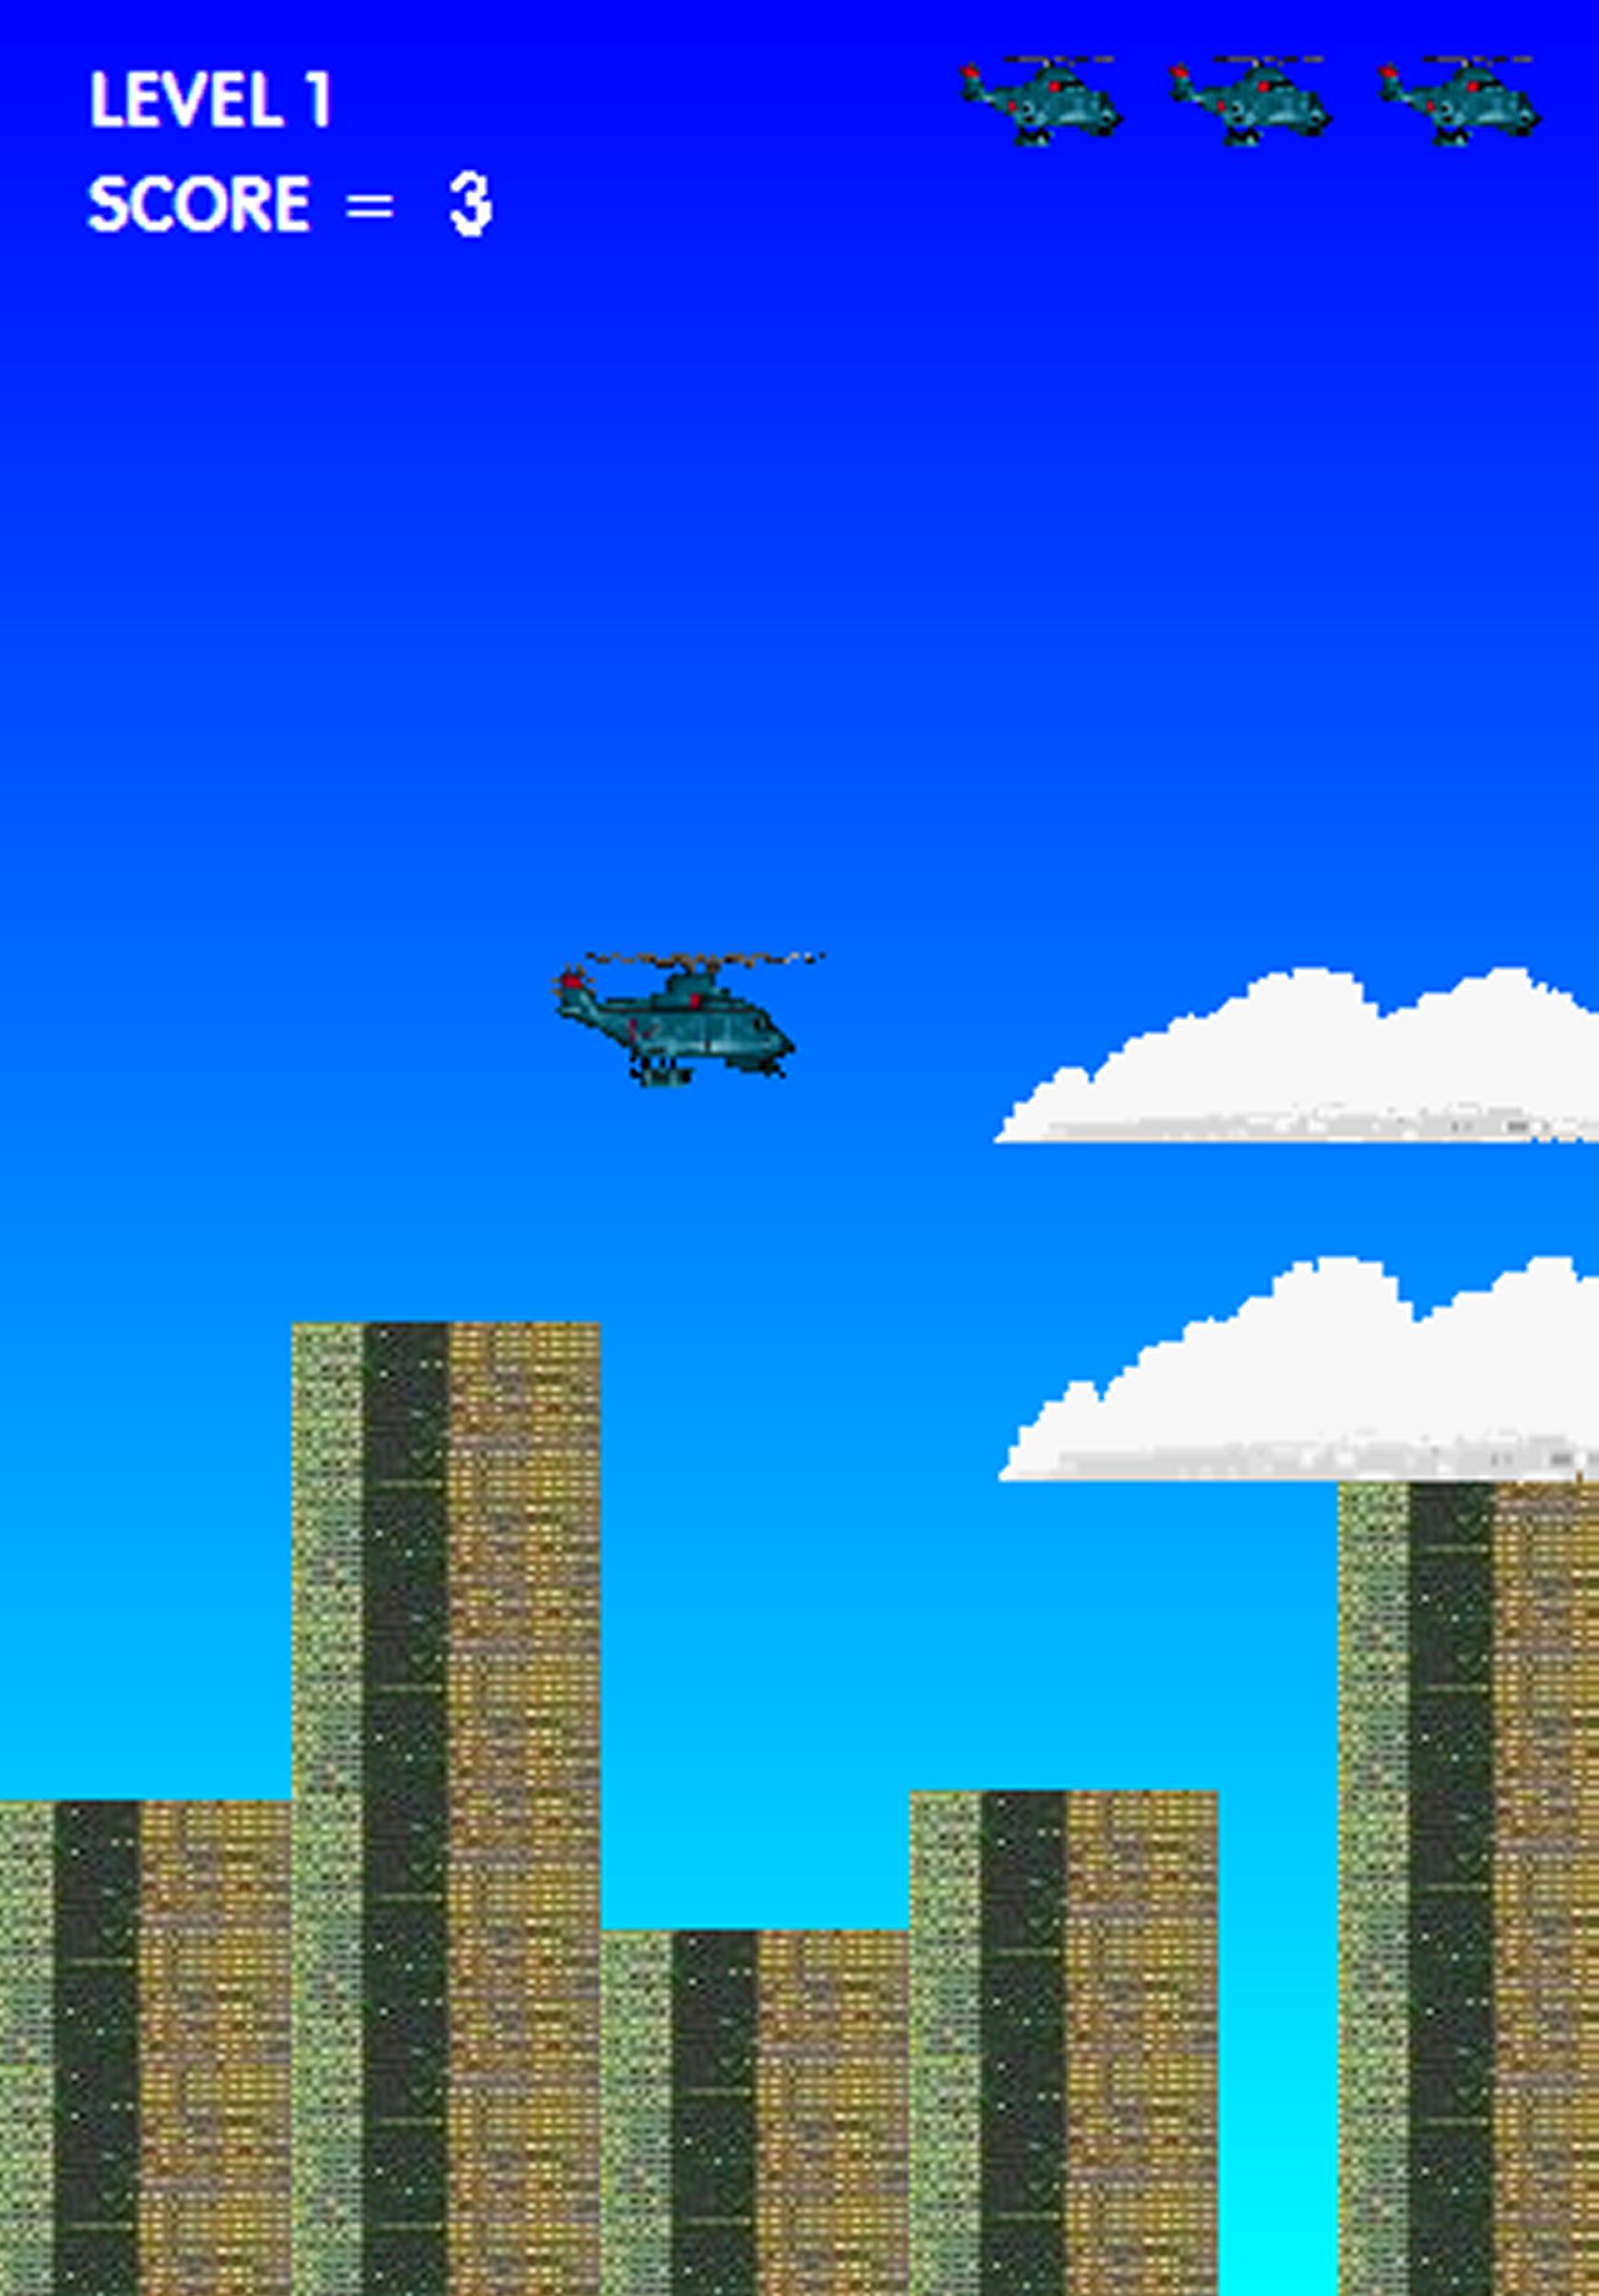 Bomber Free for Android - APK Download